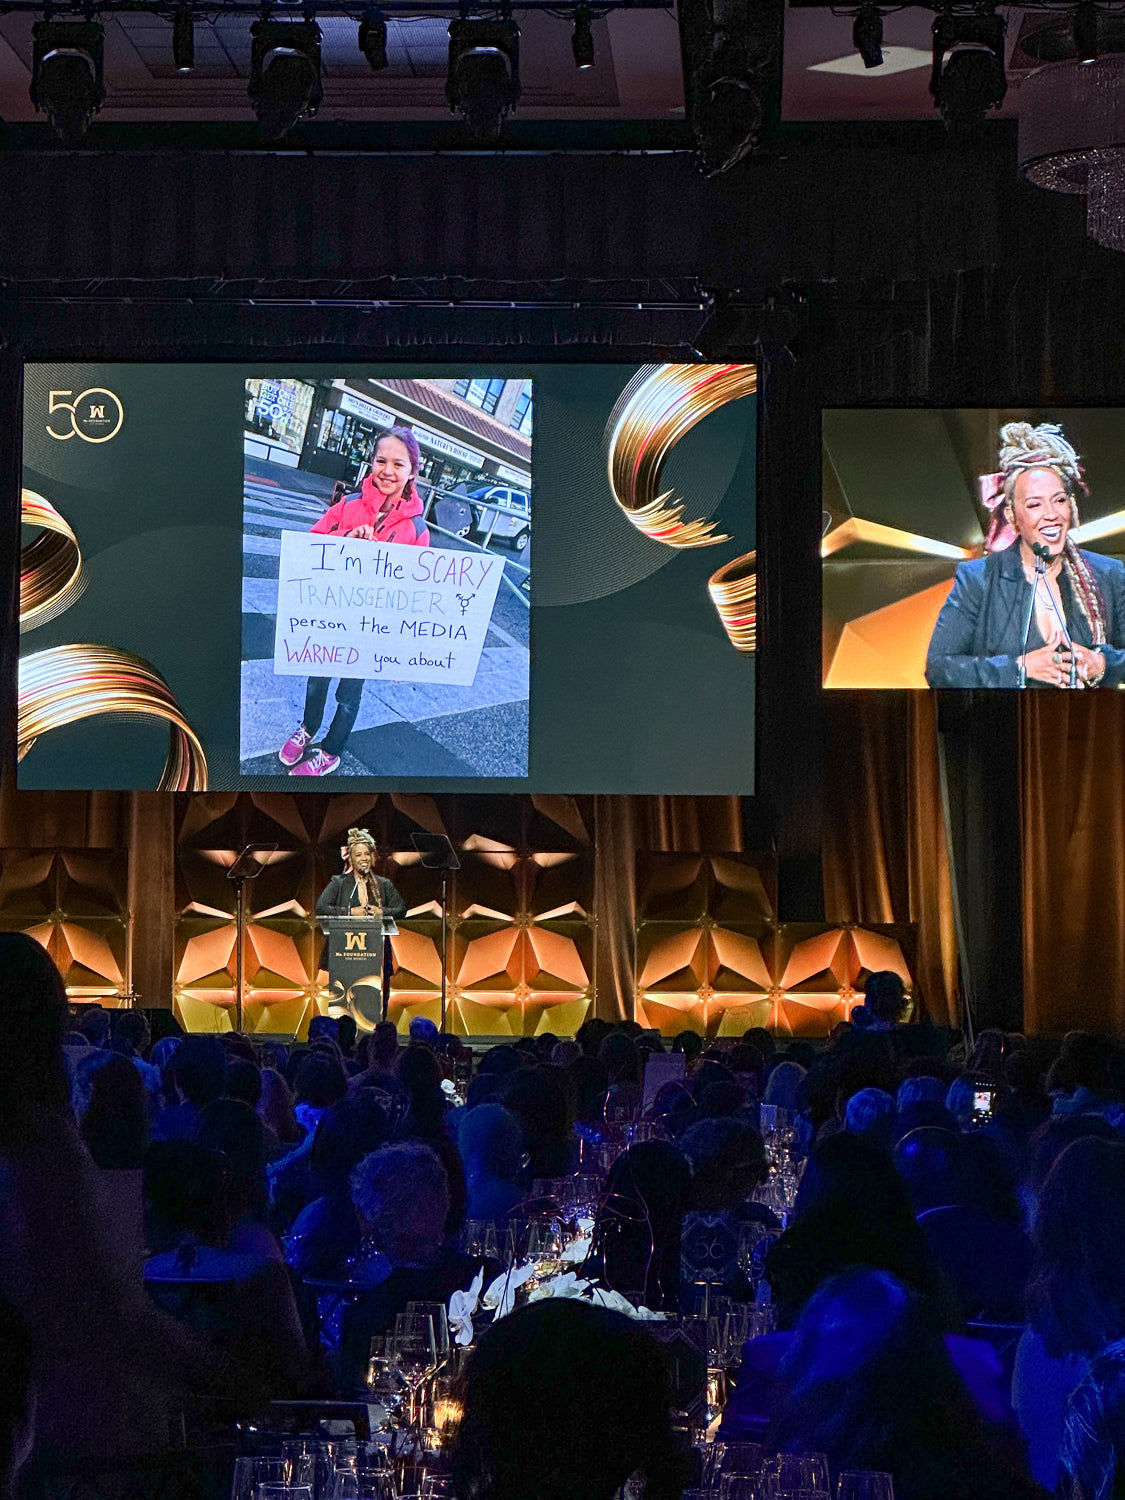 Black woman speaking at a gala with photo of young transgender girl holding poster on the screen behind her